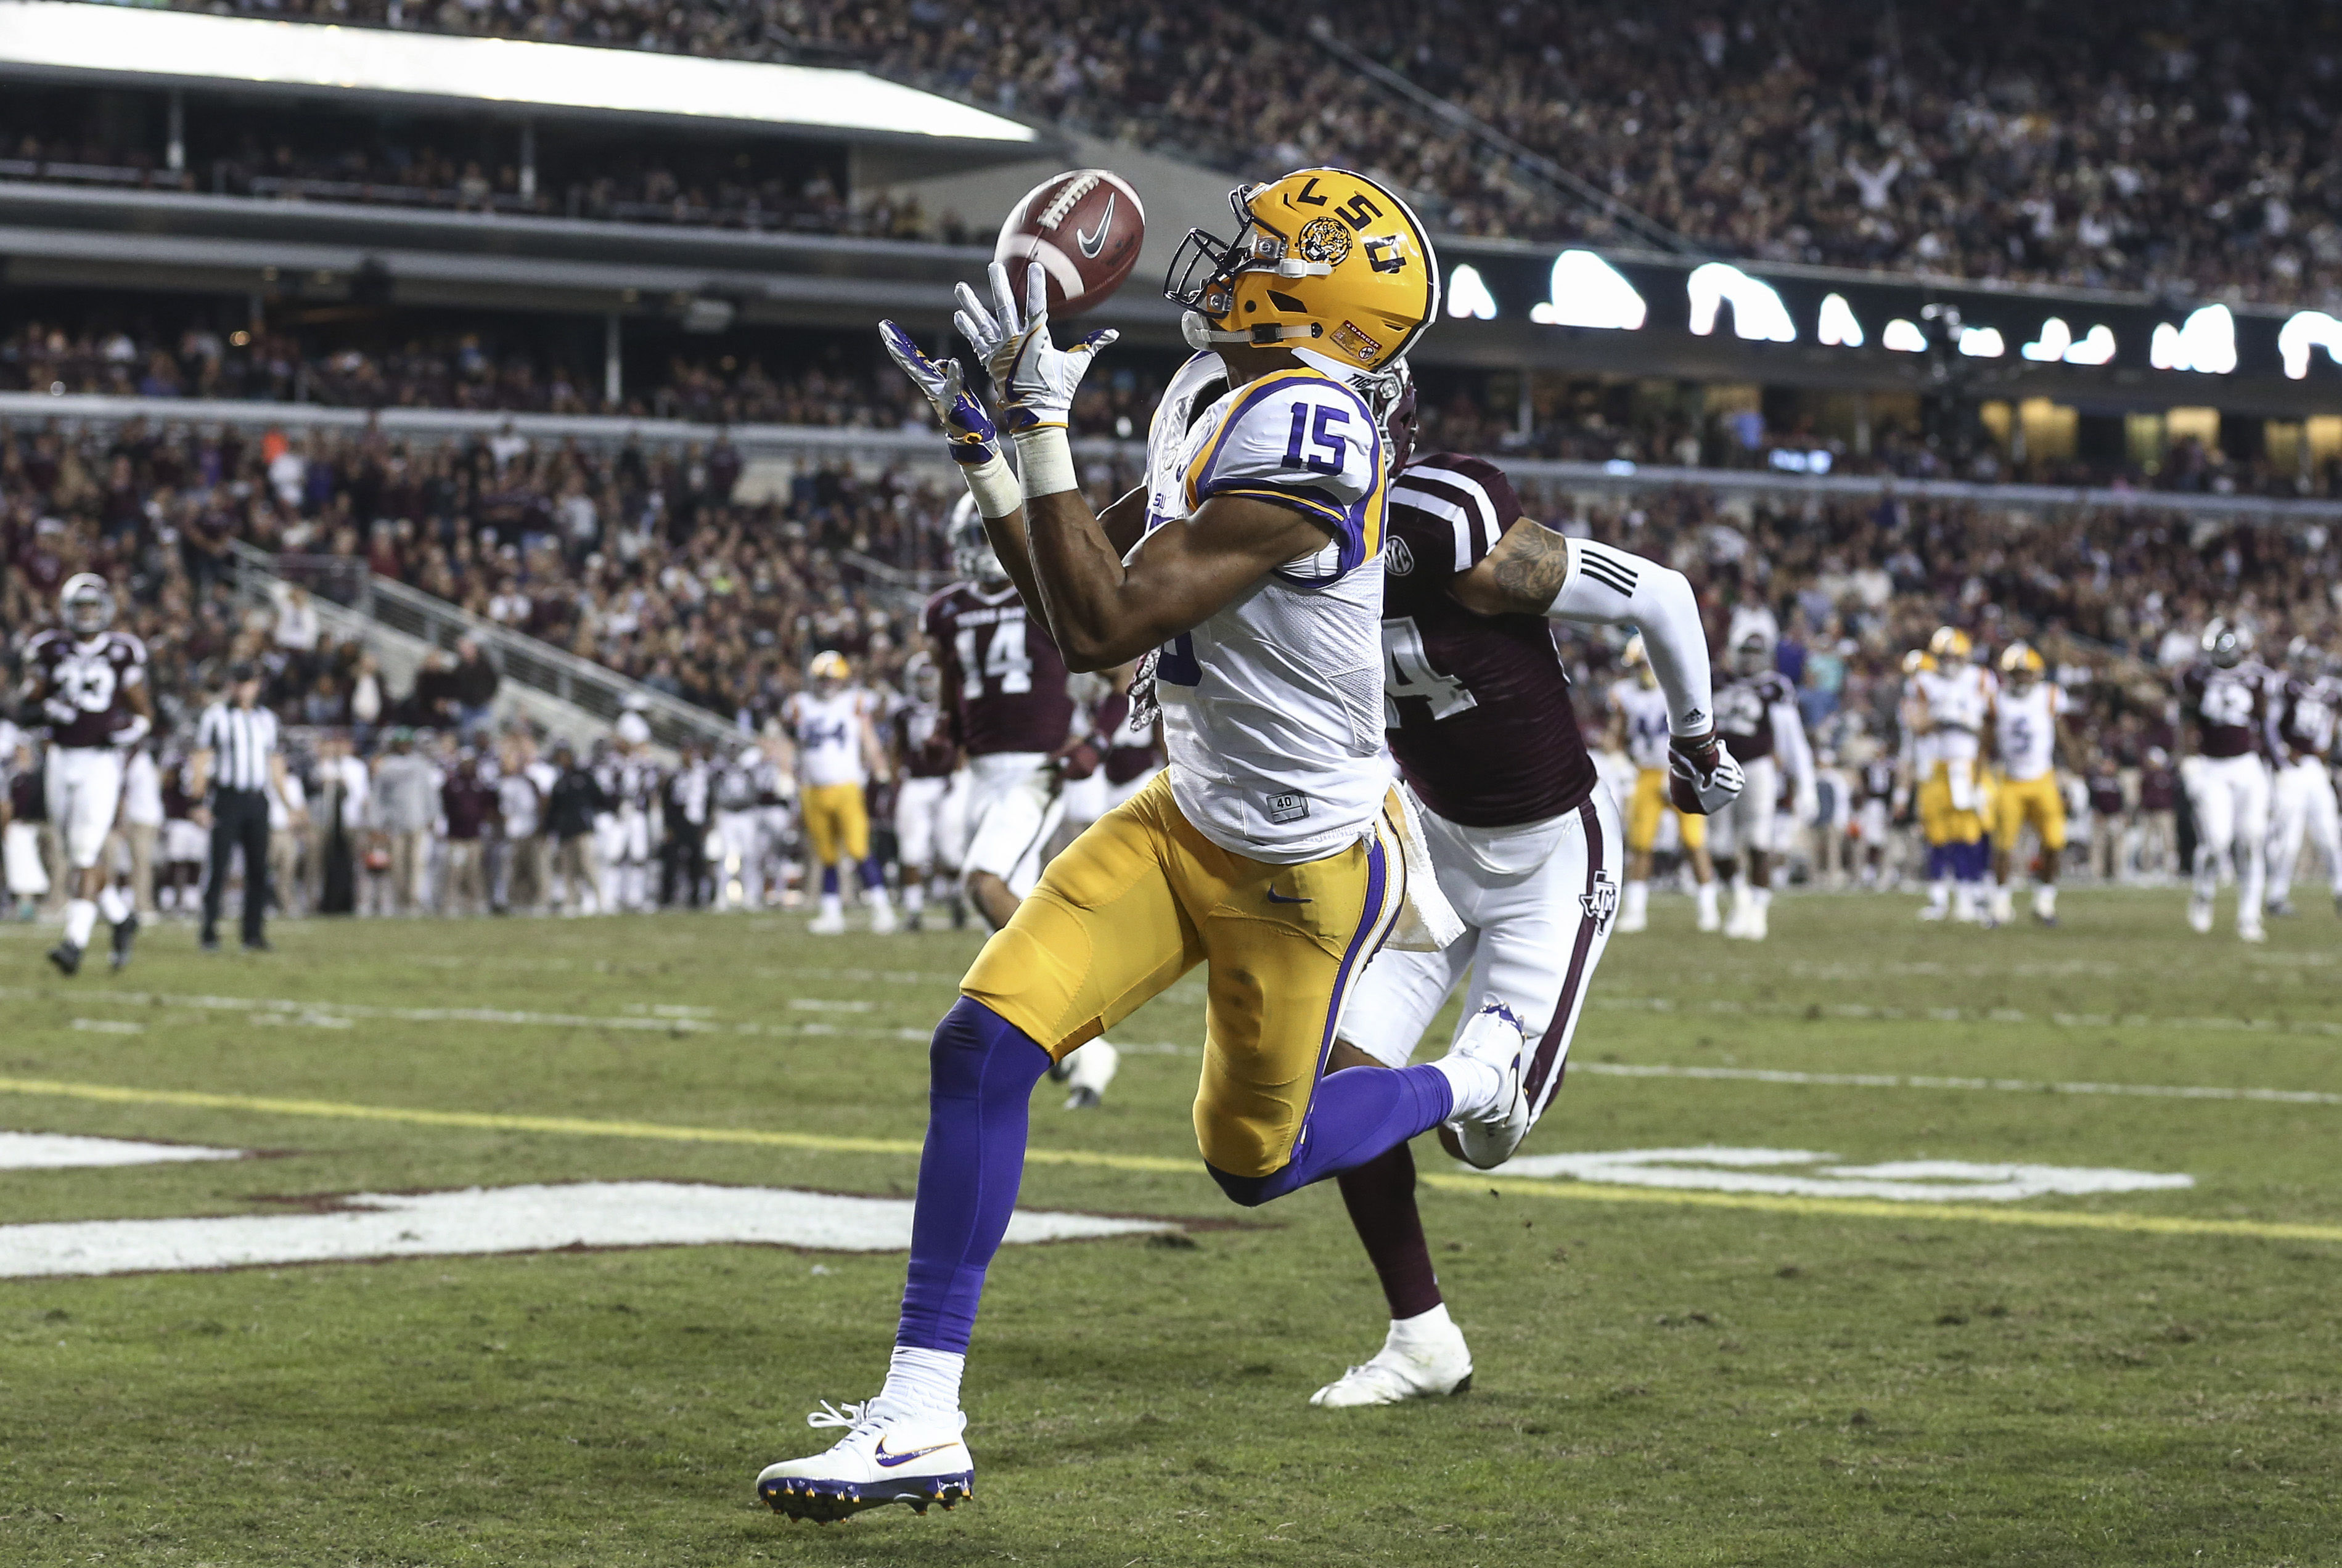 Nov 24, 2016; College Station, TX, USA; LSU Tigers wide receiver Malachi Dupre (15) makes a touchdown reception during the second quarter against the Texas A&M Aggies at Kyle Field. Mandatory Credit: Troy Taormina-USA TODAY Sports